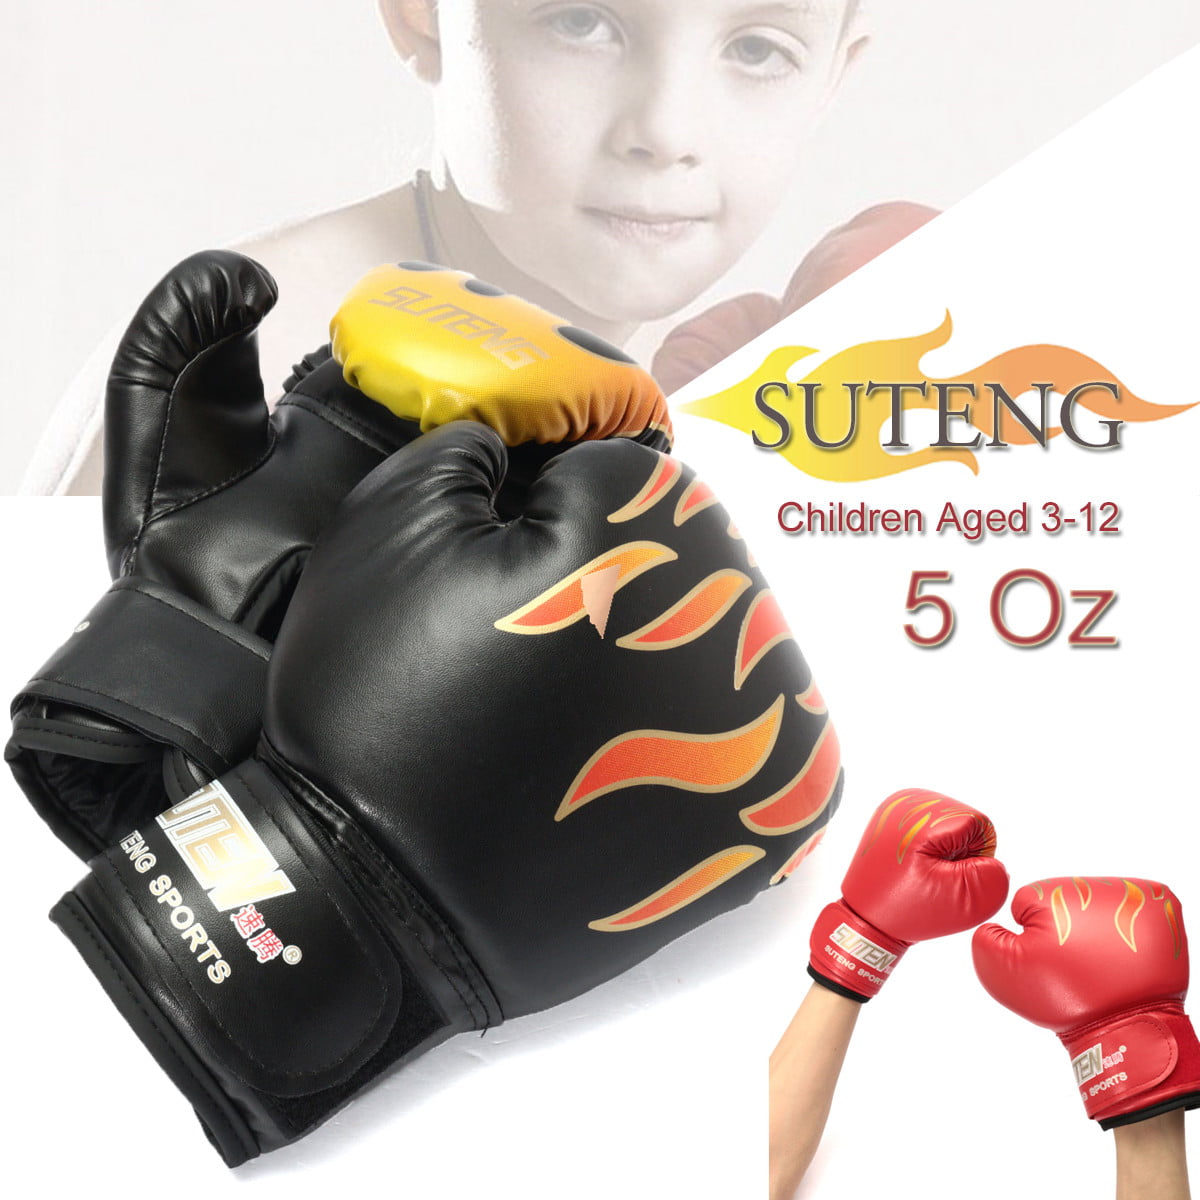 BUKA Boxing Gloves Kids Junior Punching MMA Fight Mitts Children Youth US NEW 